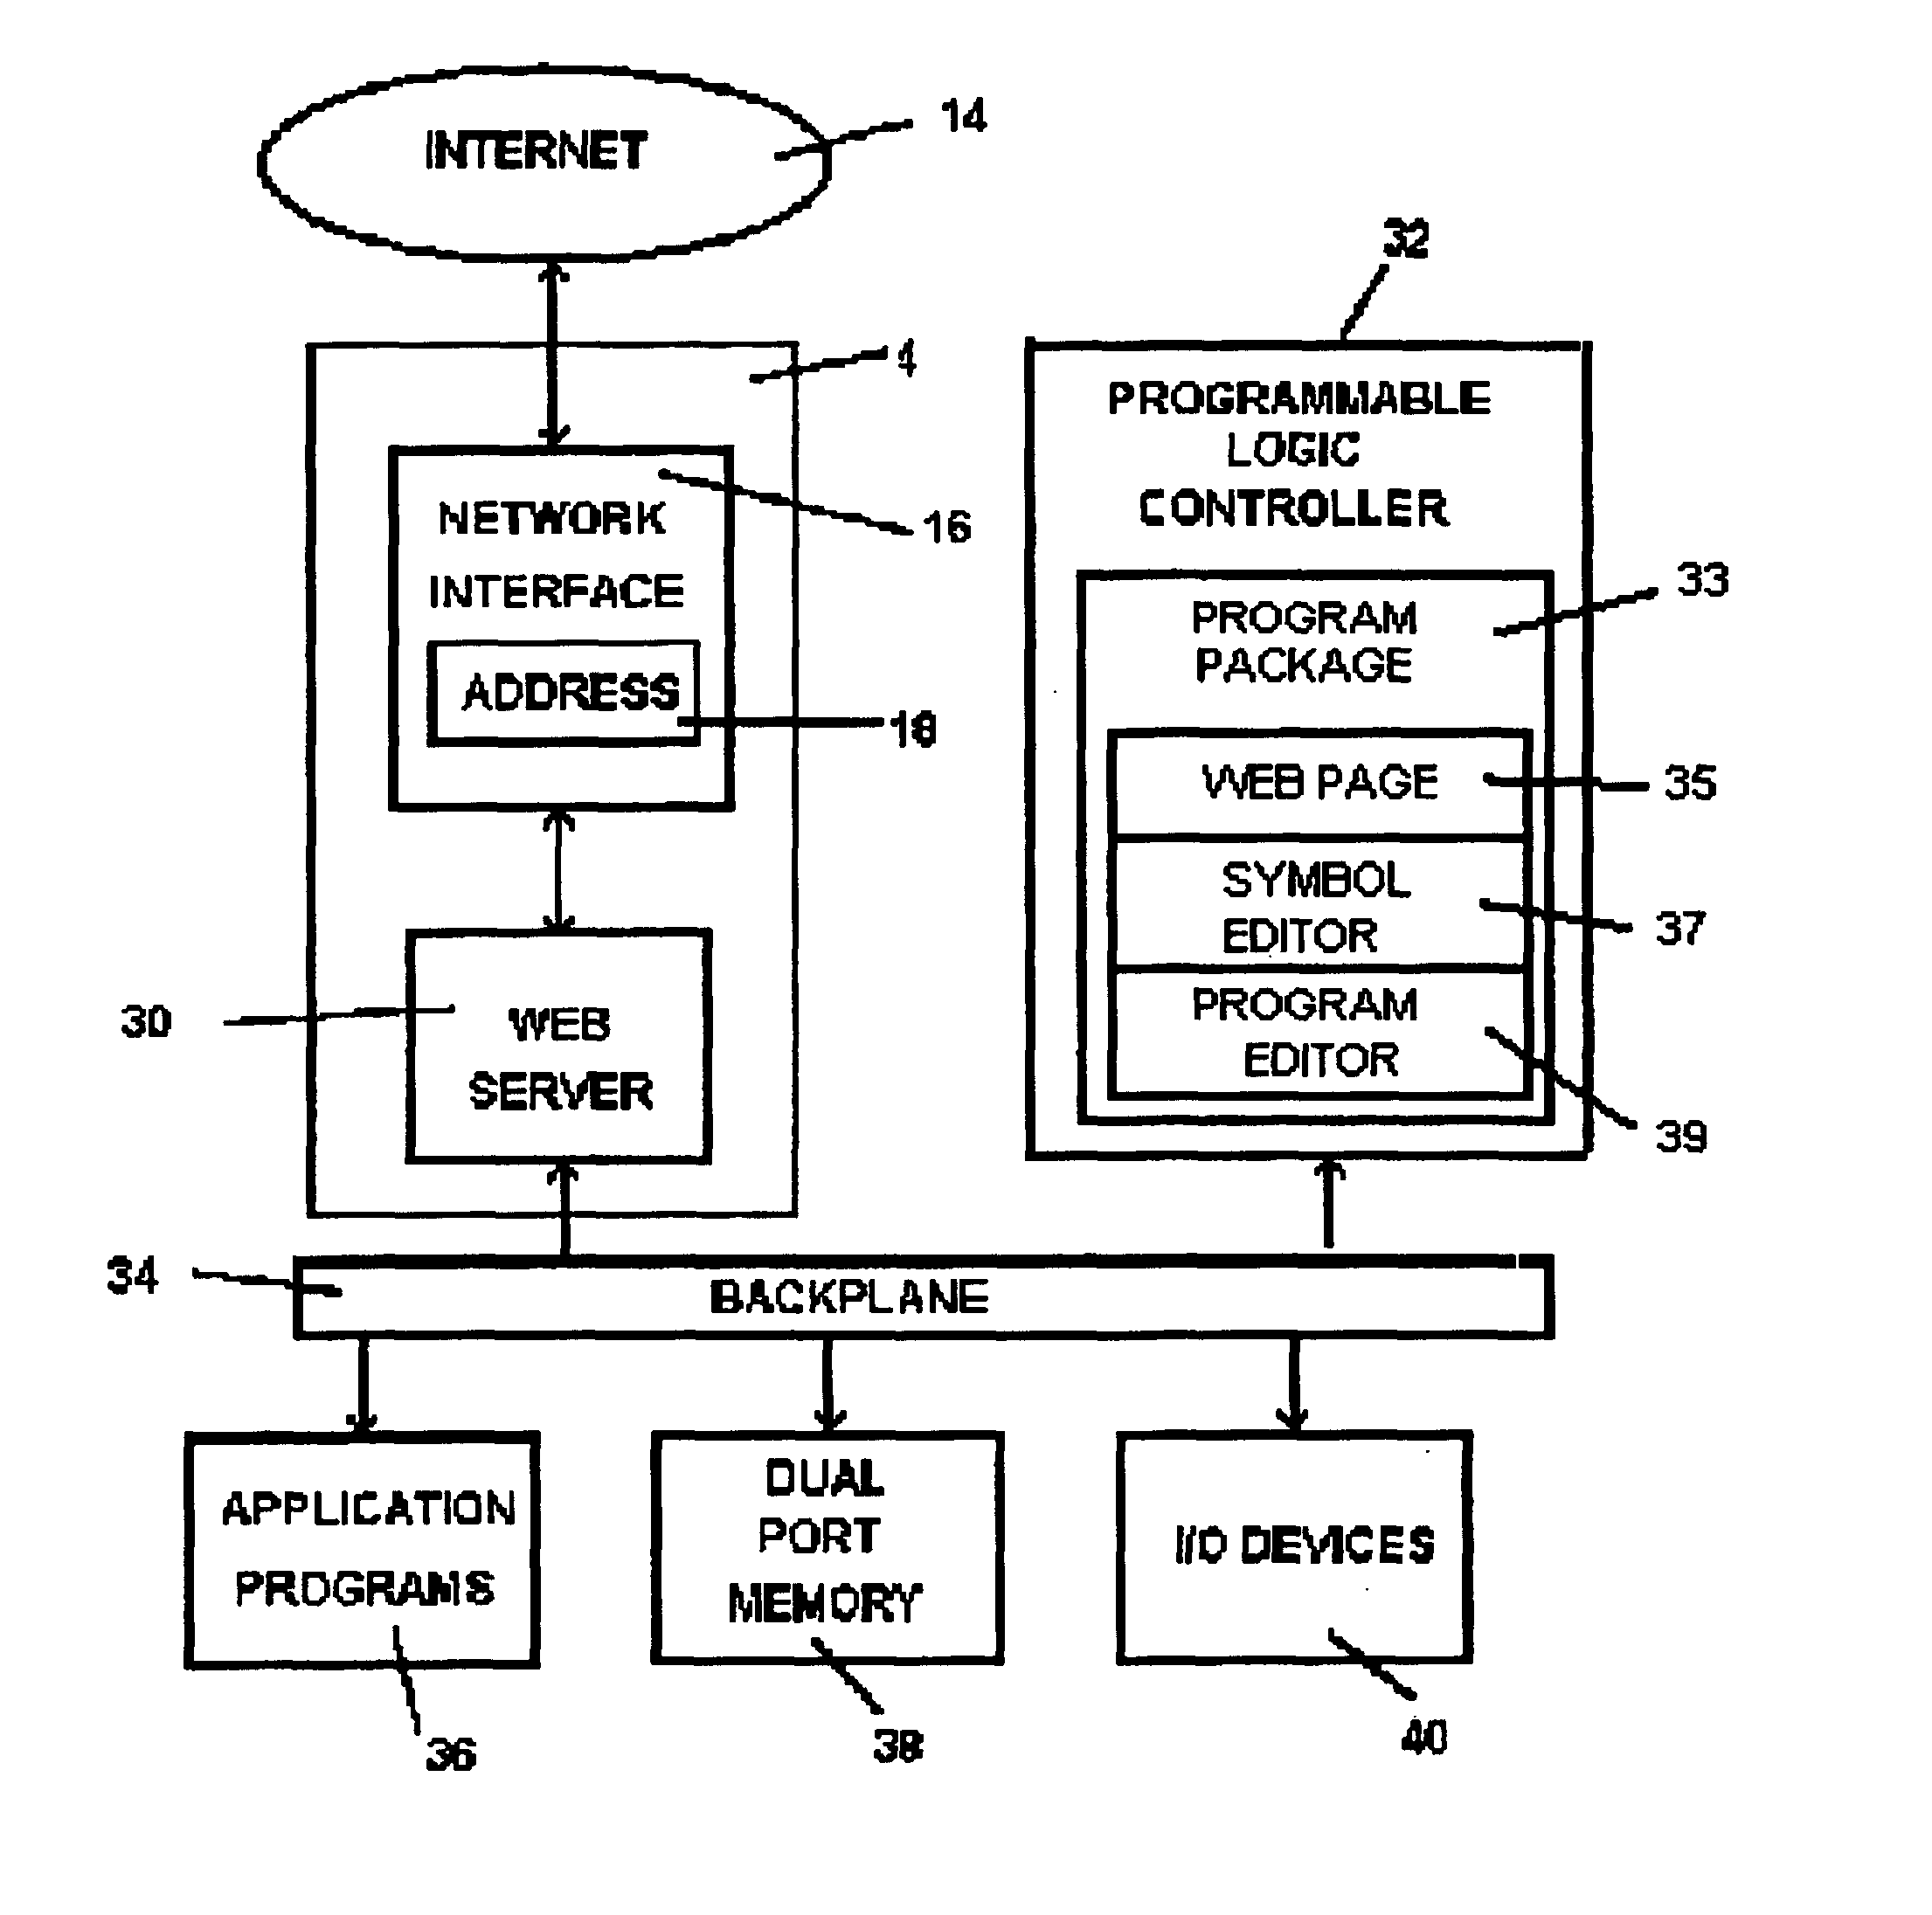 System for programming a programmable logic controller using a web browser